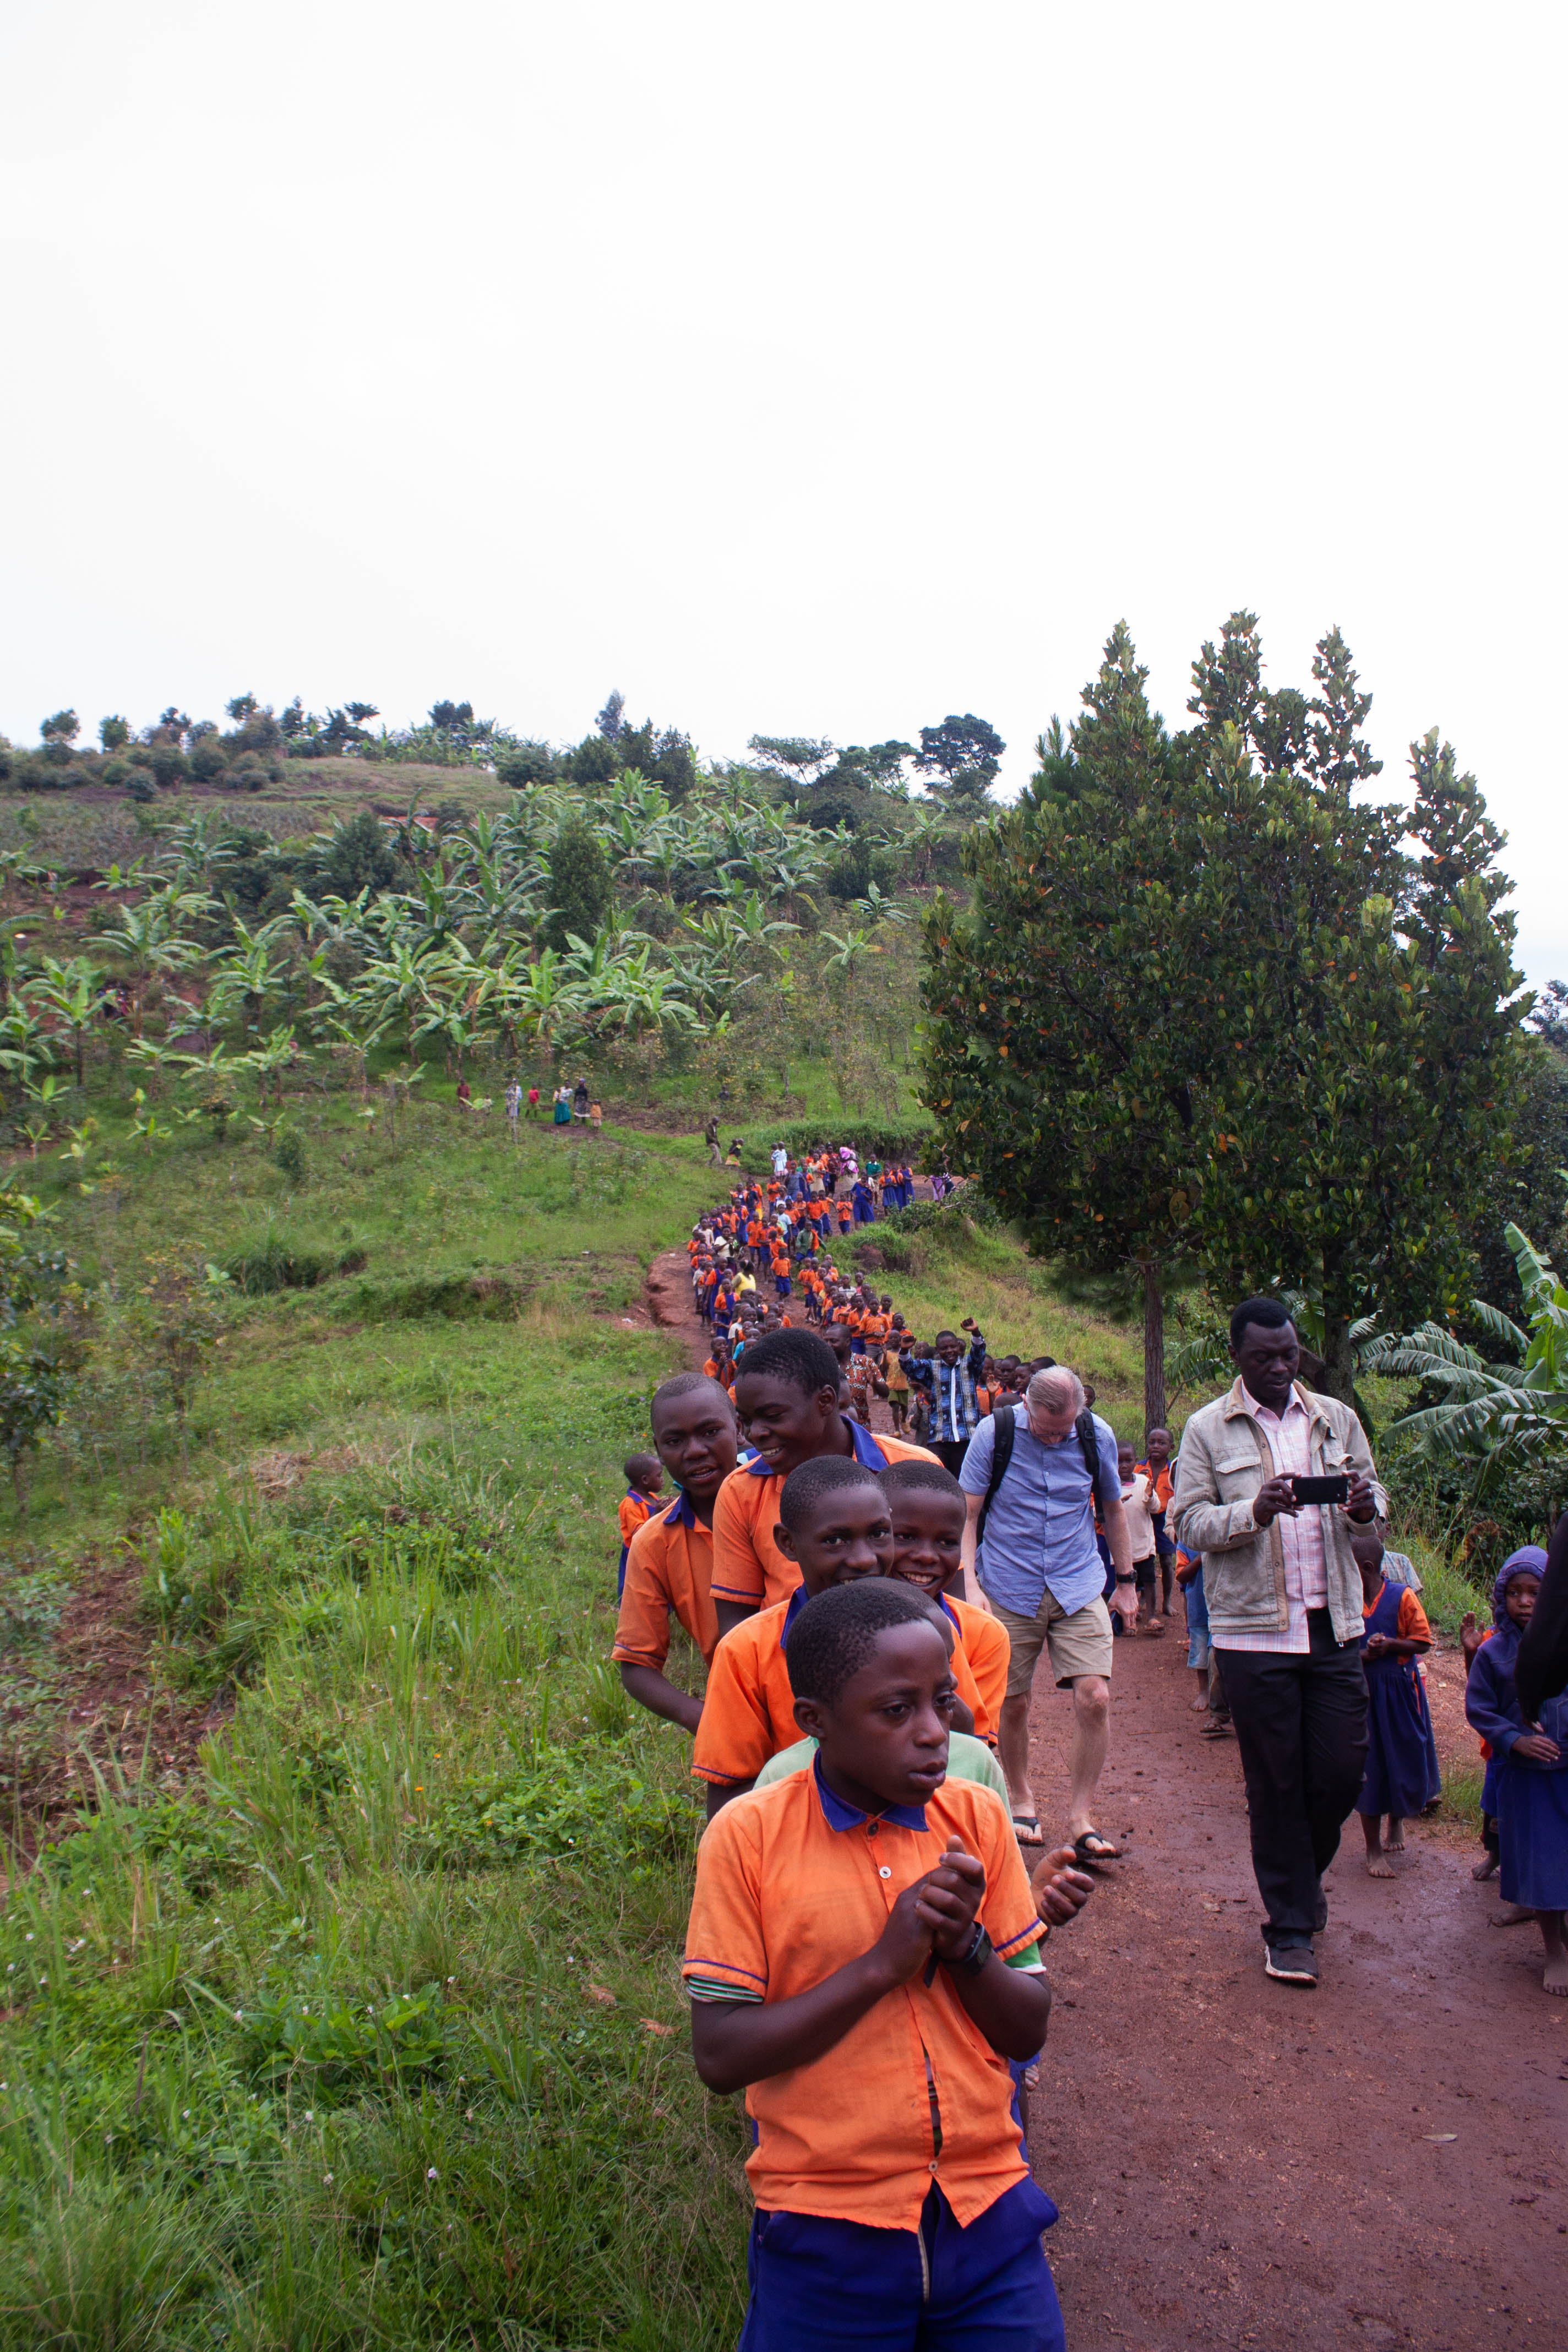 On Day 4 the team visited the Matere Model School, located on the hills above Kasese. In the photo, the school children walk along the dirt roadway, joining the team on their walk to visit the school.